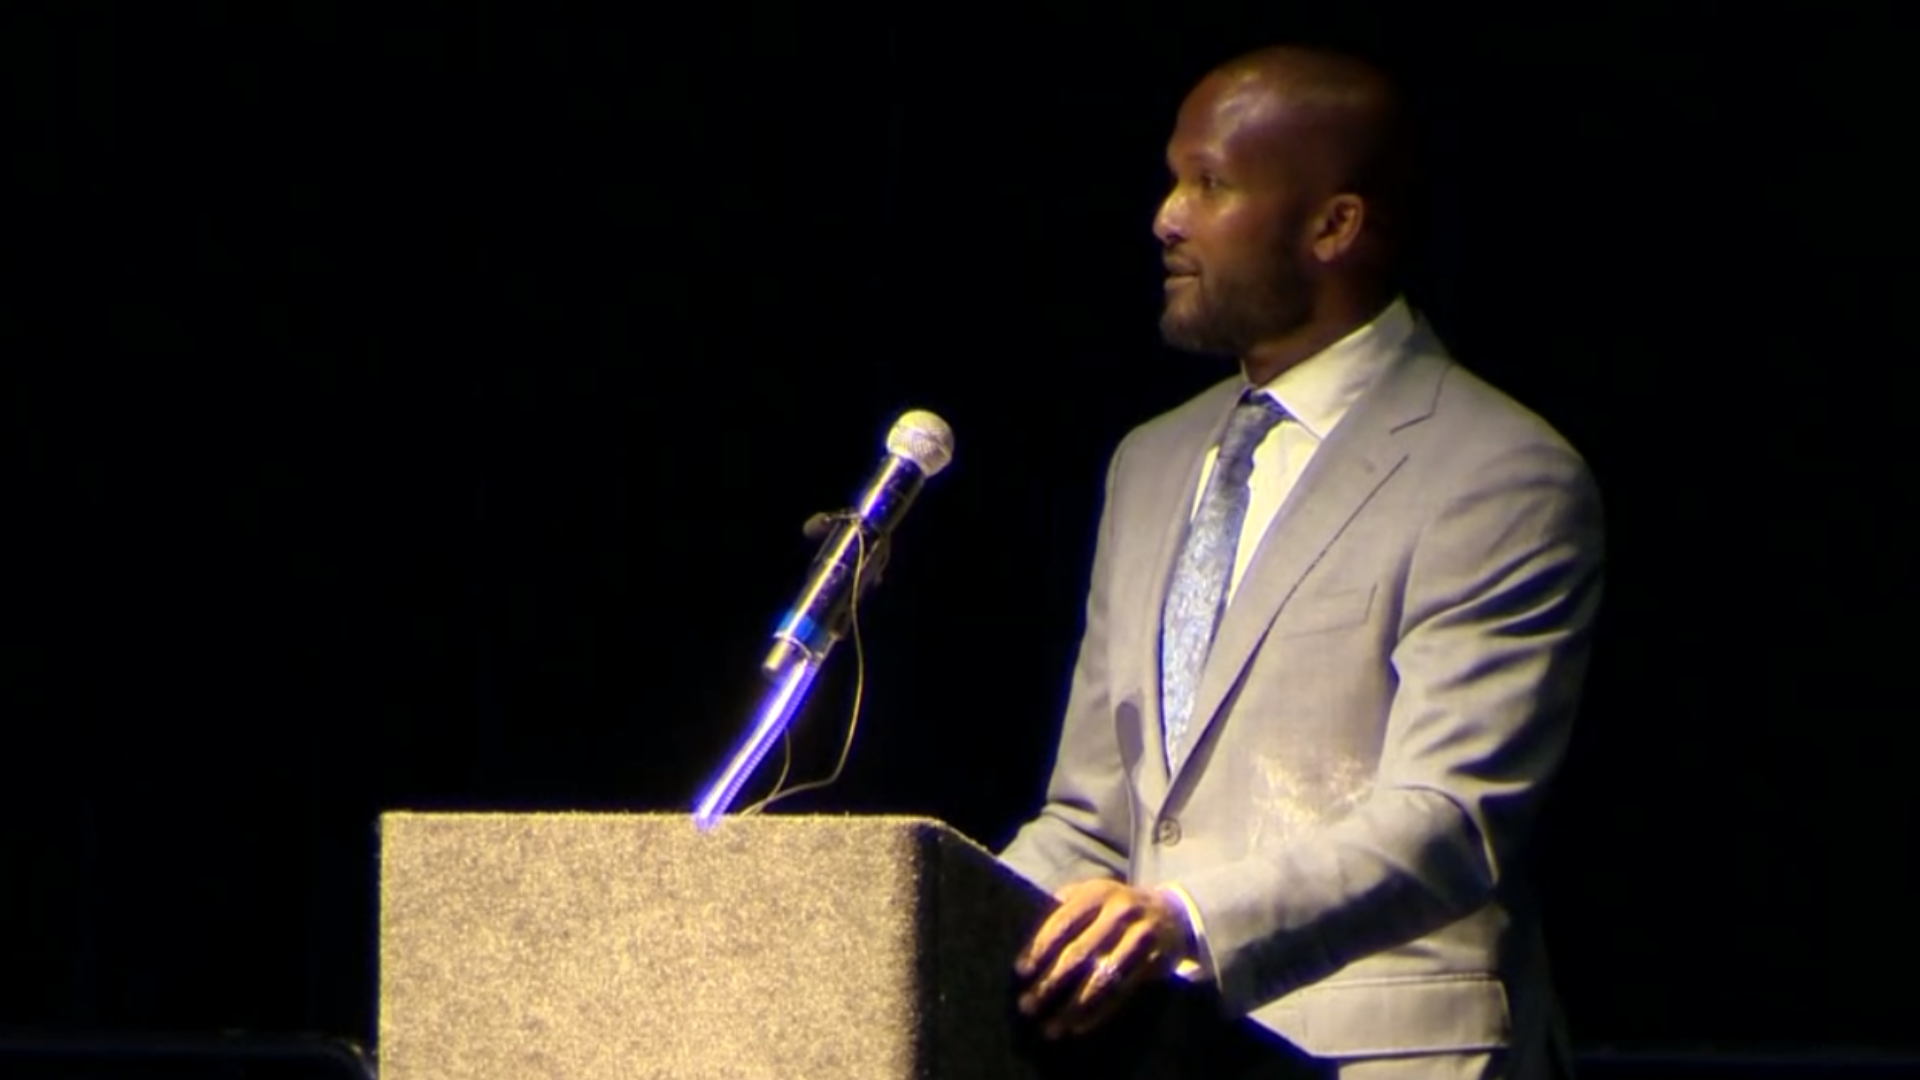 The 2019 Denver Boy Scouts Sports Breakfast took place on Tuesday, April 9, 2019 at Pepsi Center with keynote speaker Champ Bailey.